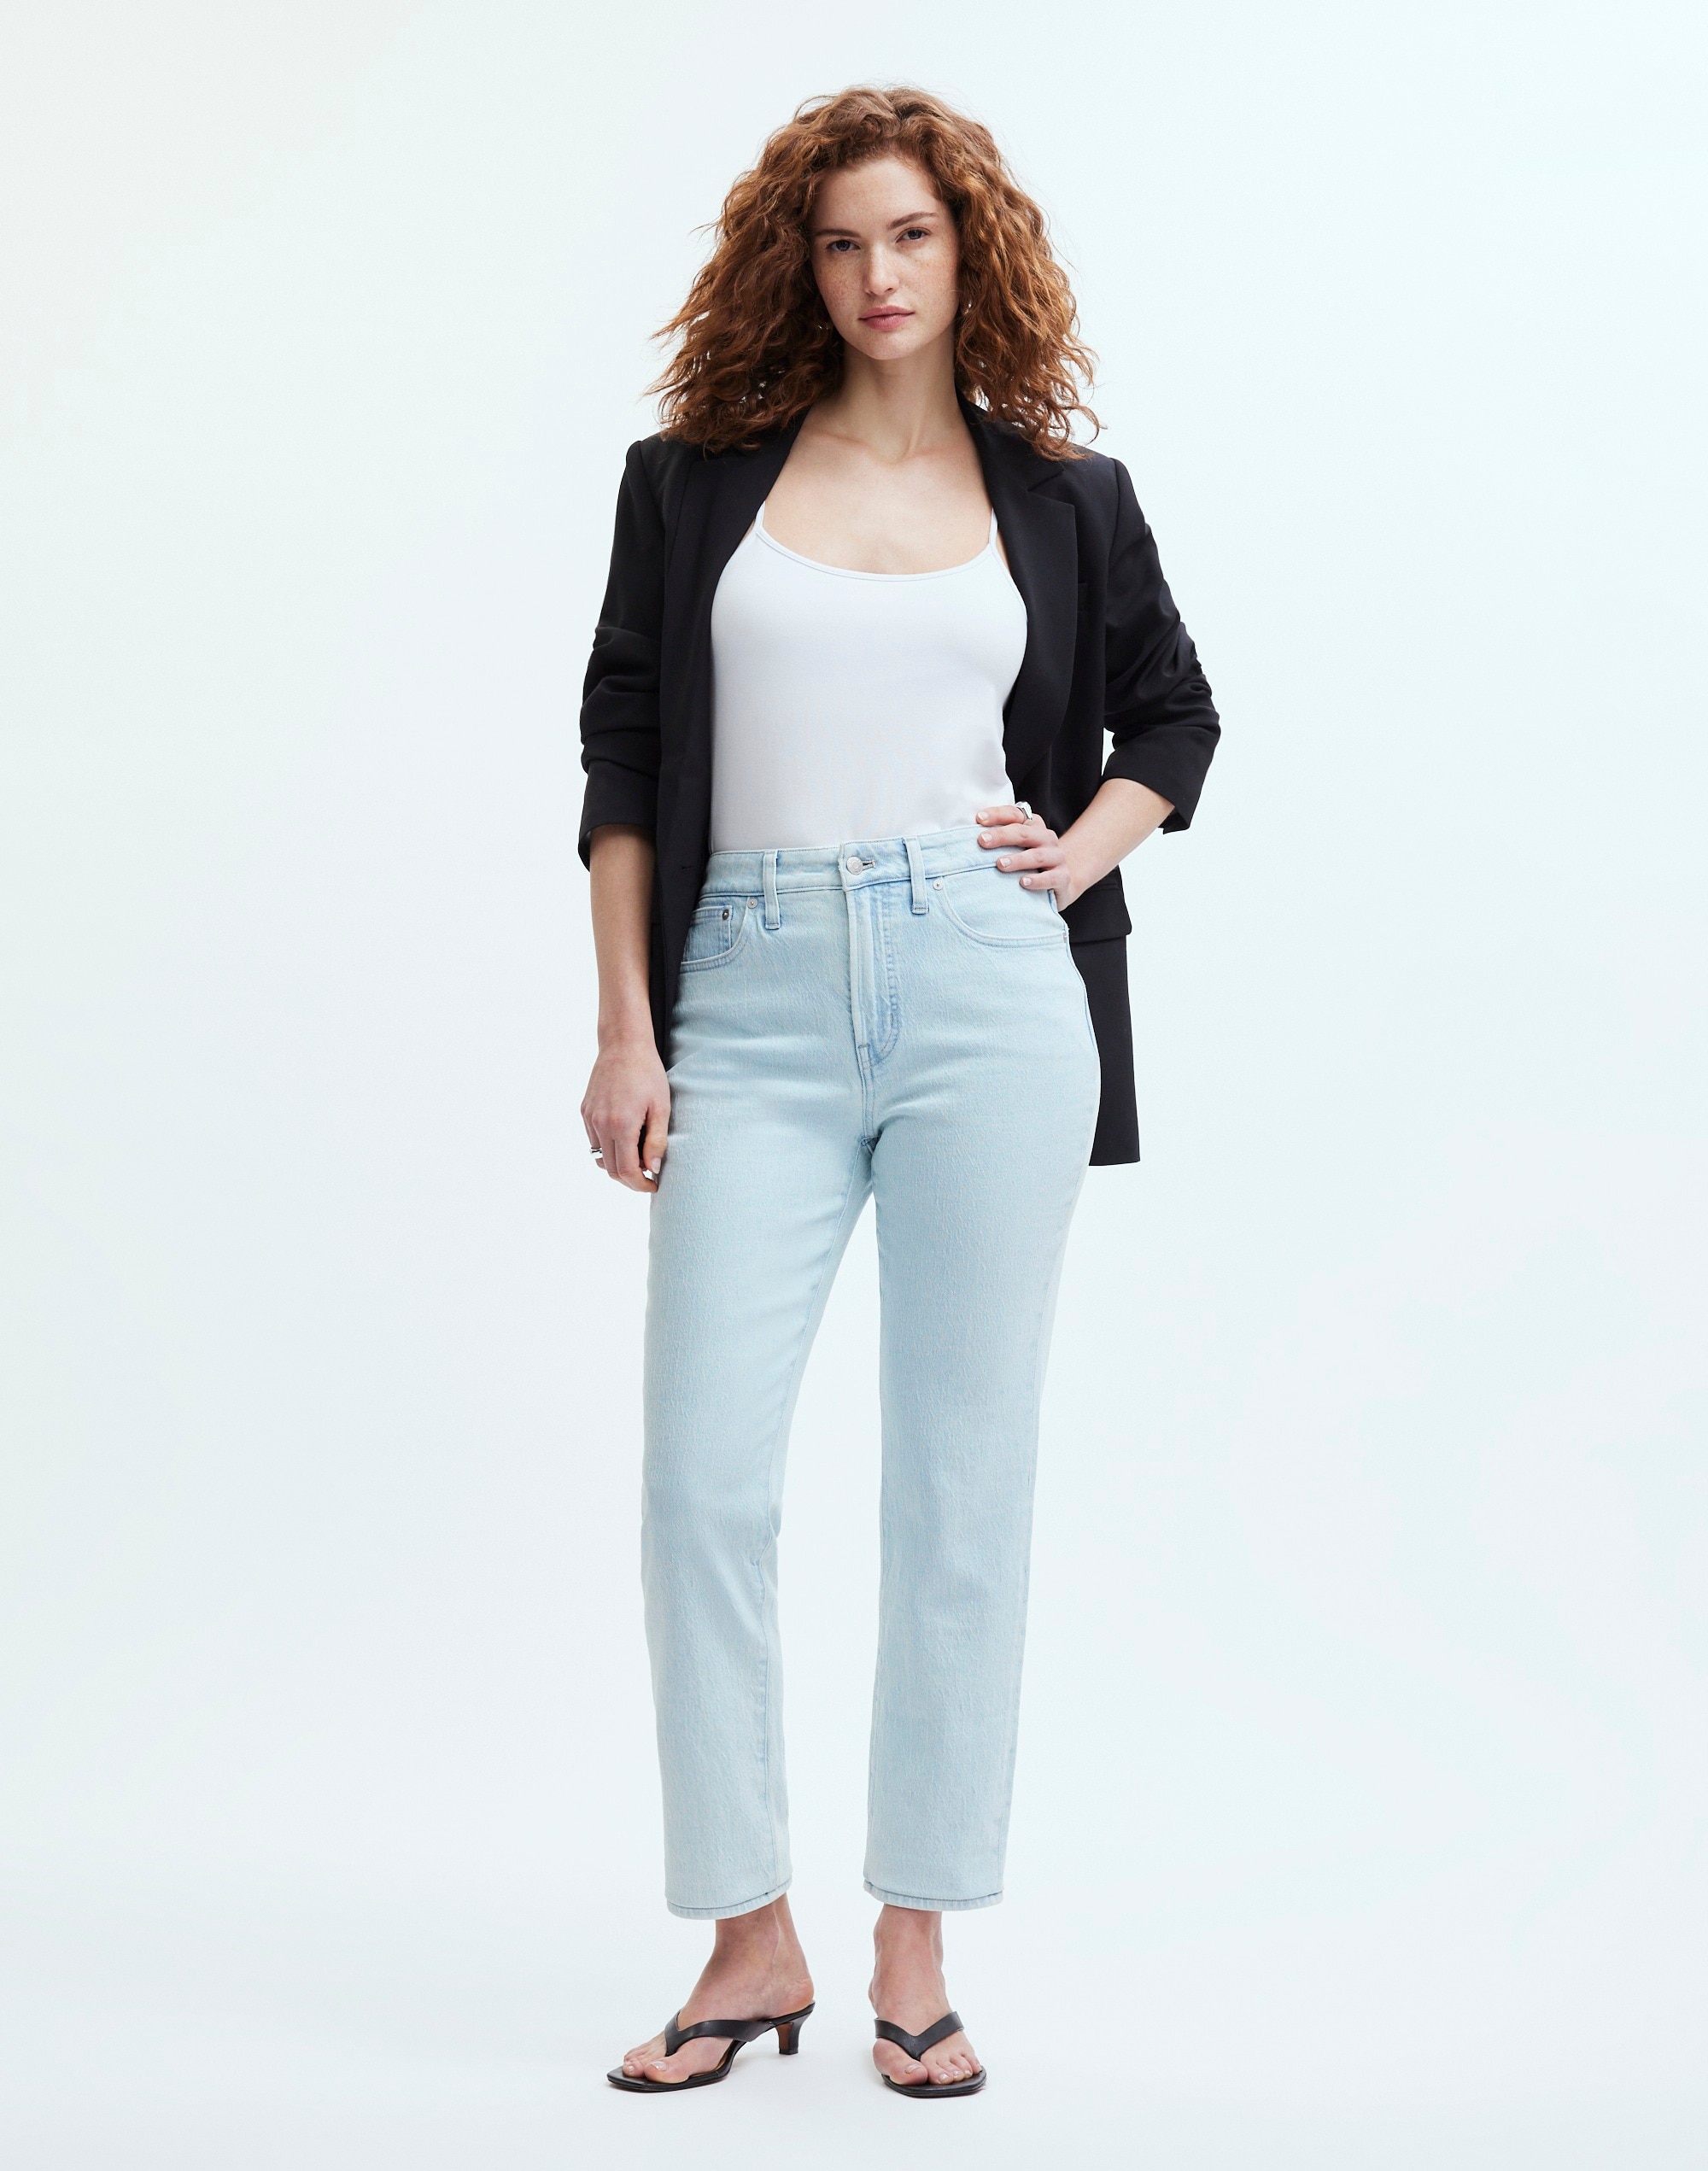 The Curvy Perfect Vintage Jean Chesthunt Wash